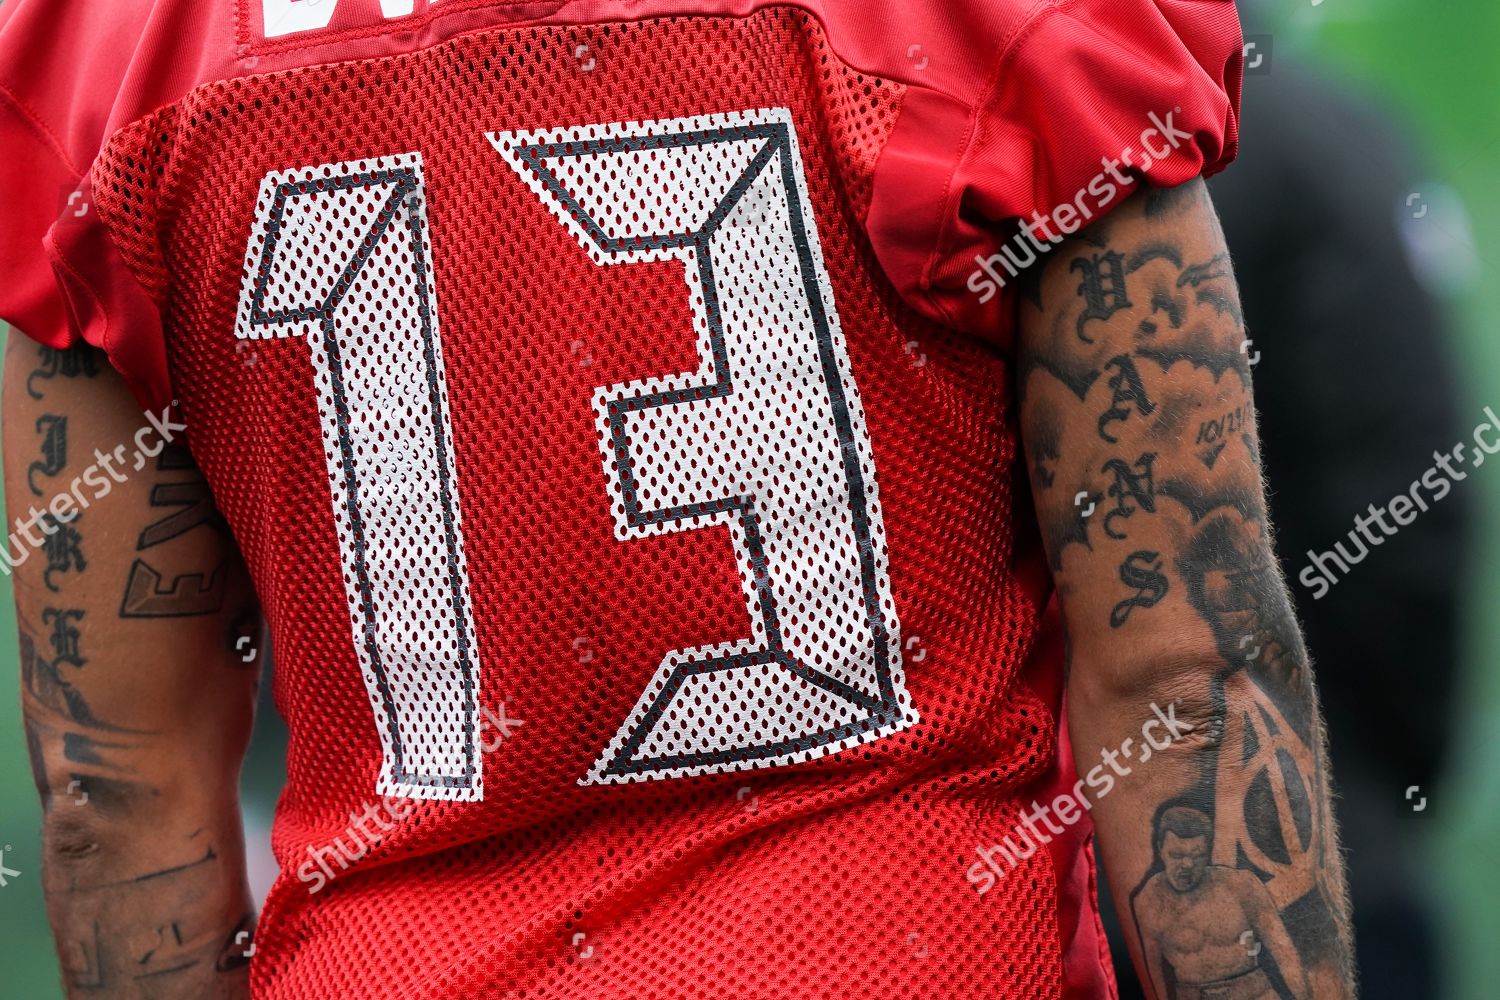 Mike Evans thanks God after record day helps Bucs clinch division